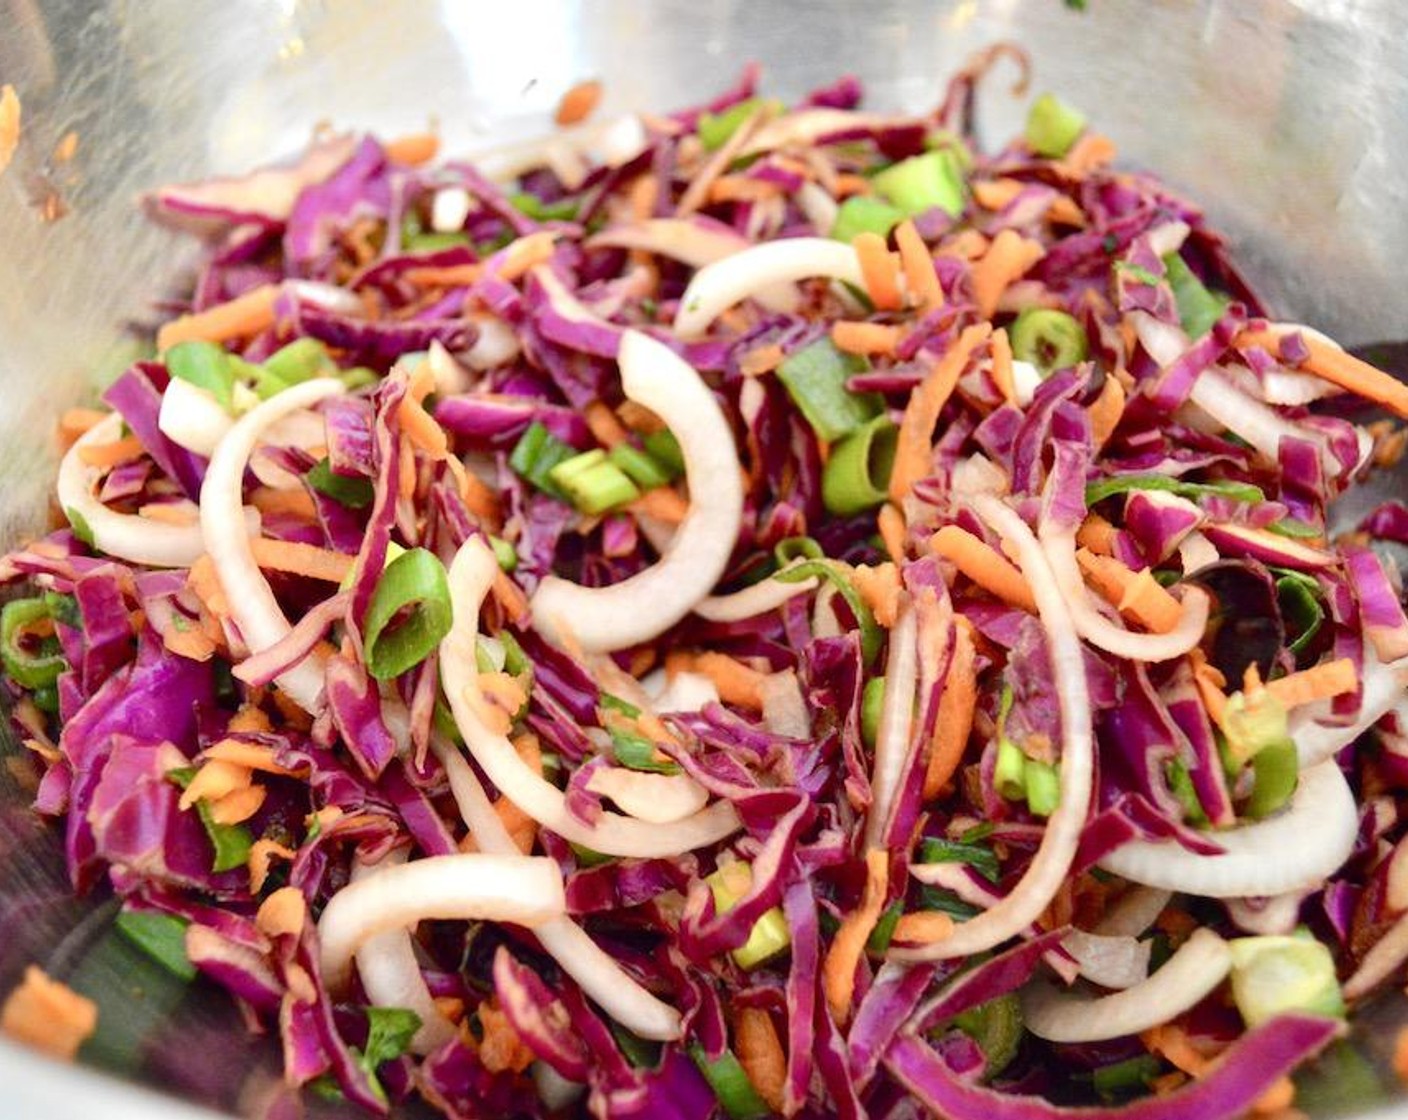 step 3 Mix the shredded Red Cabbage (2 3/4 cups), Onion (1), Carrot (1), Scallion (1 bunch), Fresh Cilantro (1 Tbsp), Rice Vinegar (2 Tbsp), Soy Sauce (1 Tbsp), and Pickle Juice (1 Tbsp) together thoroughly in a bowl.